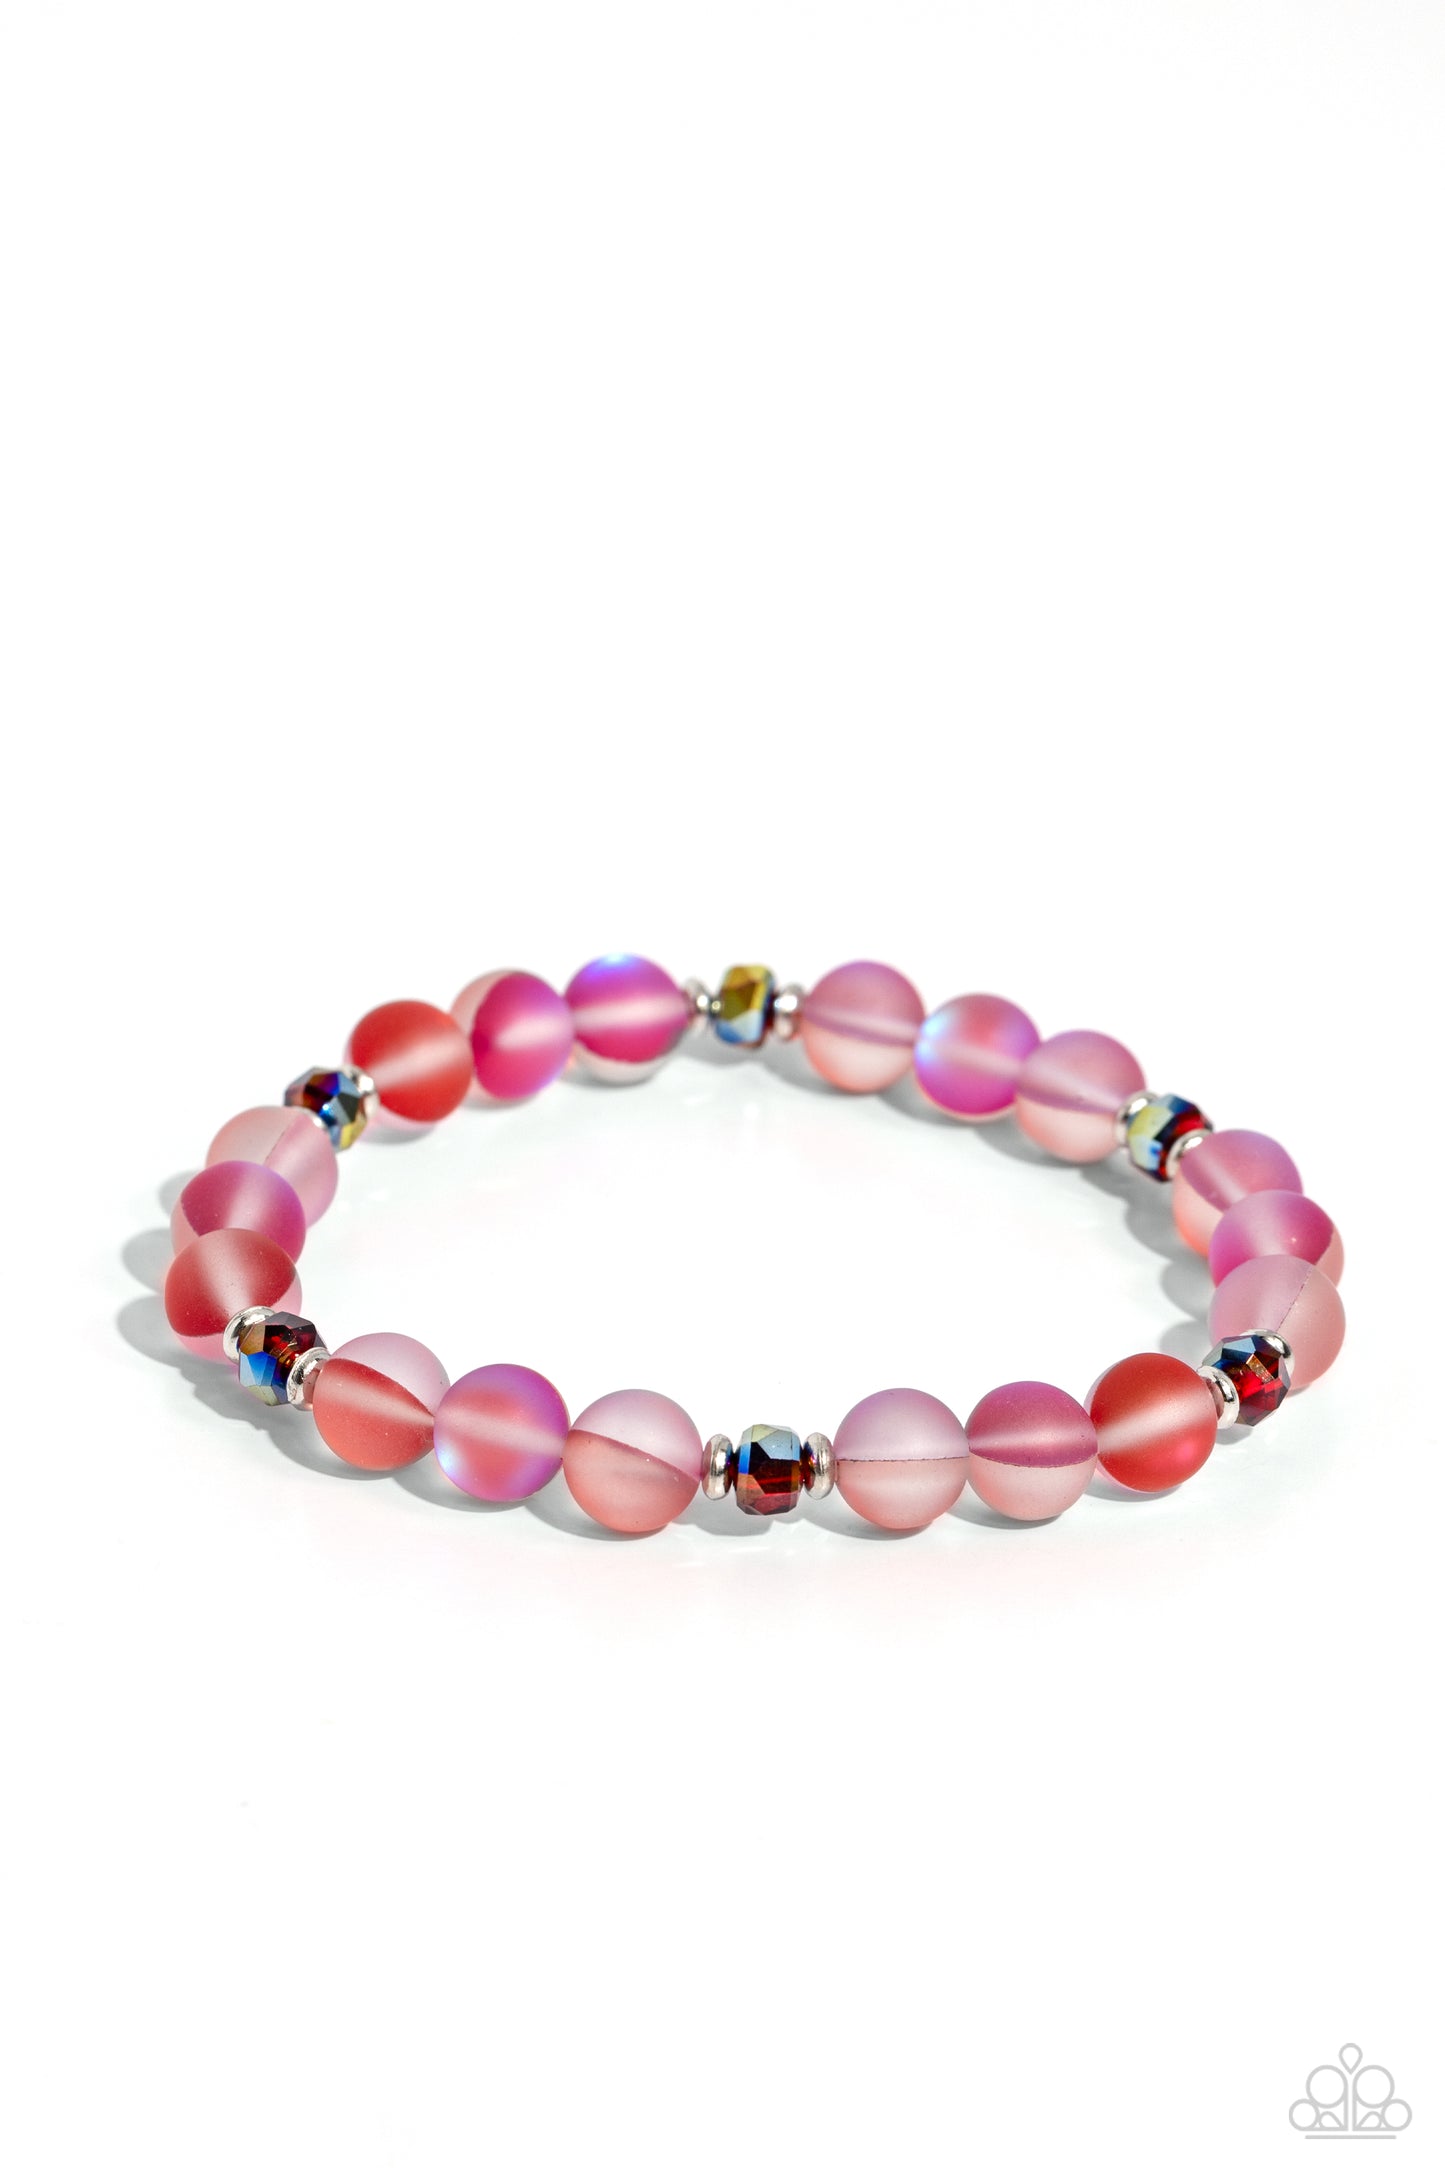 Mermaid Mirage Red Stretch Bracelet - Paparazzi Accessories  Infused with silver accents and faceted red beads, a dreamy collection of frosted glassy red beads is threaded along a stretchy band around the wrist for an enchanting glow.  Sold as one individual bracelet.  P9SE-URRD-153XX